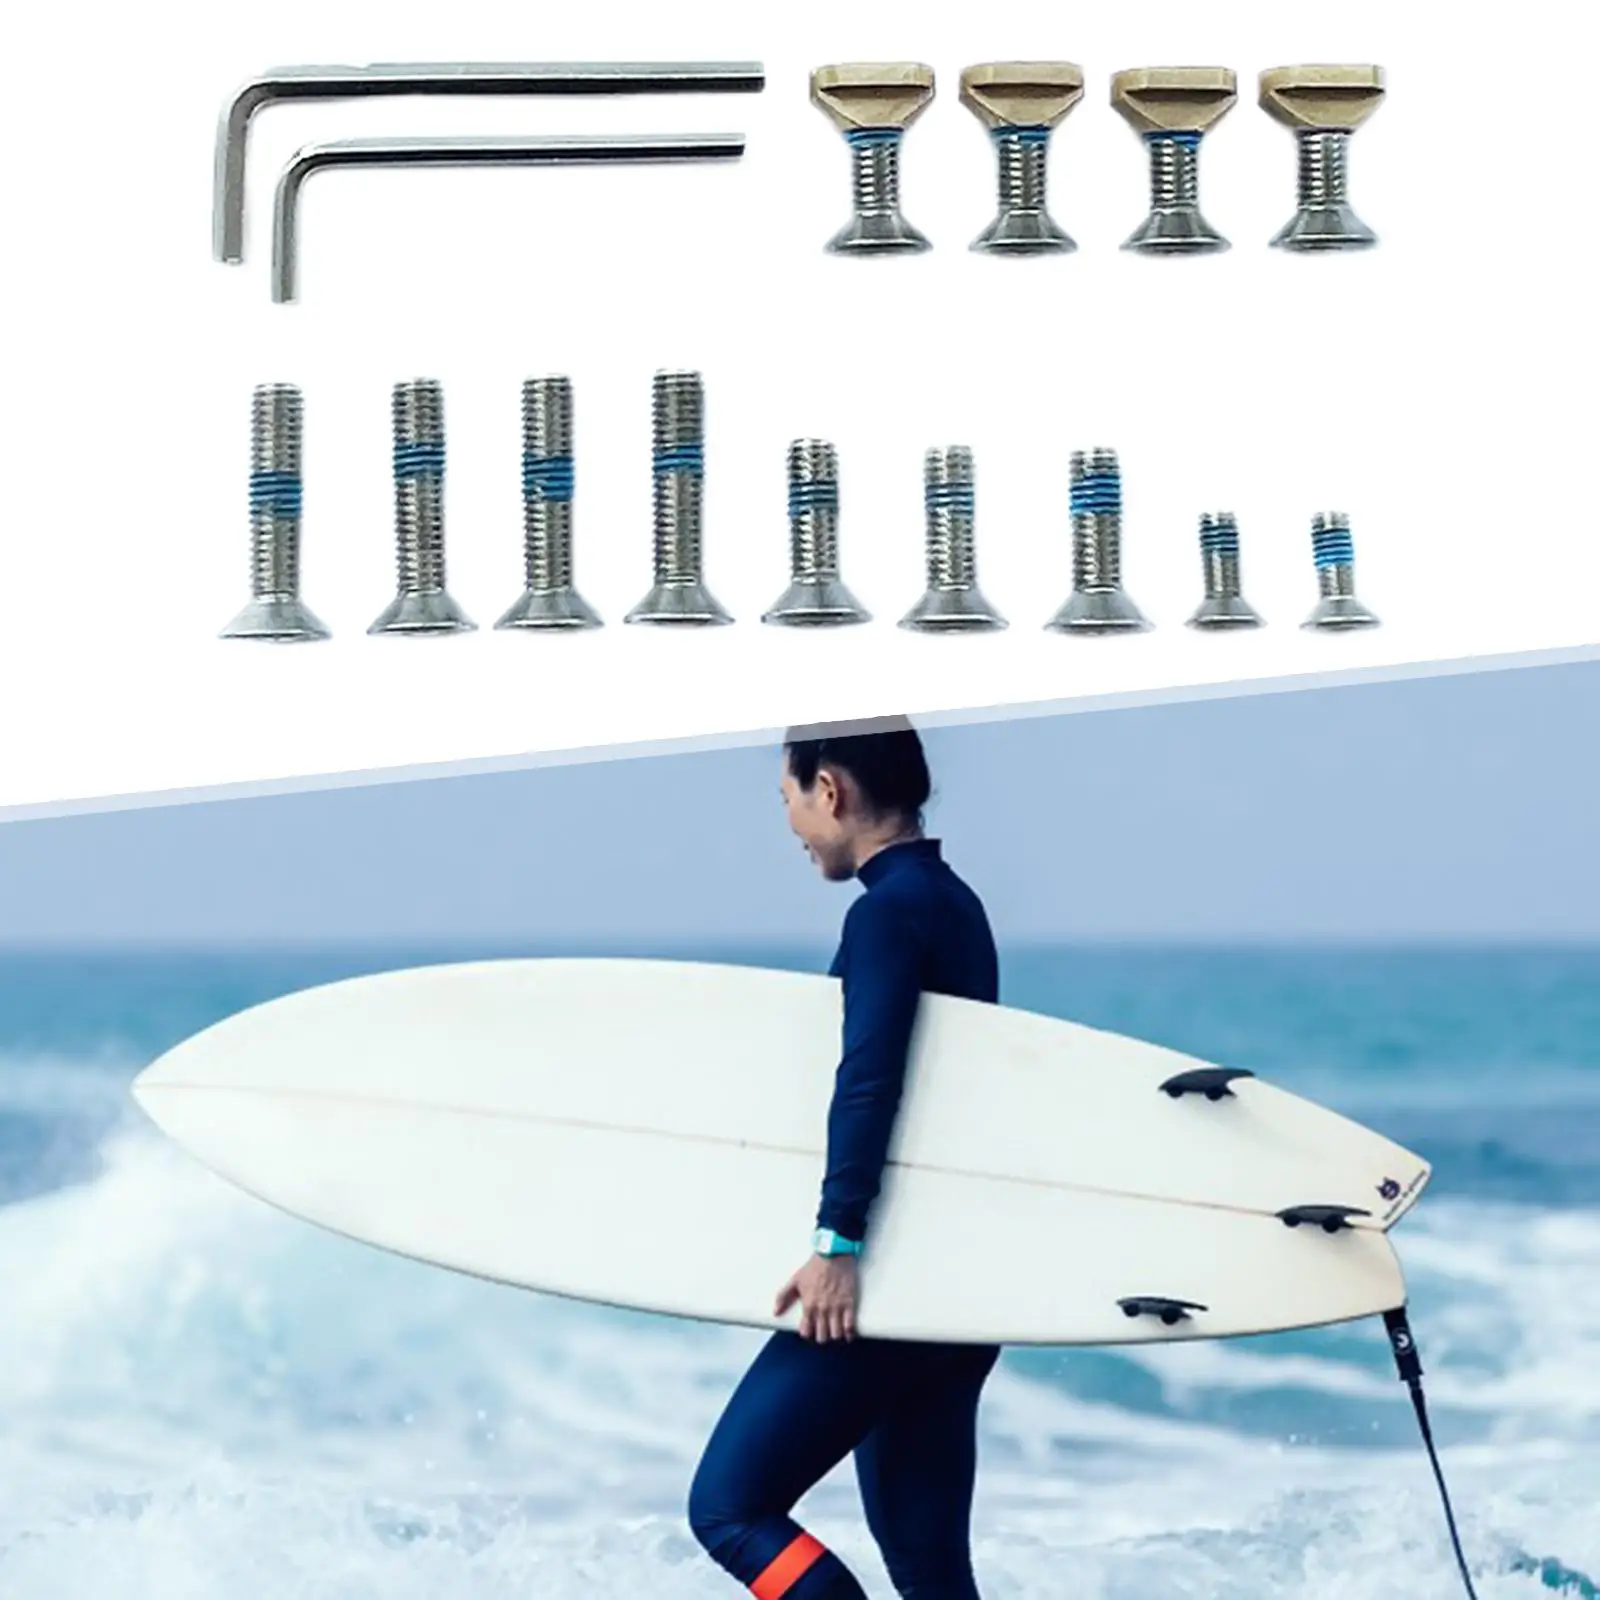 Surfboard Fin Screws High Quality Sturdy Durable Stainless Steel Waterproof for Surf Longboard Paddleboard Stand Paddle